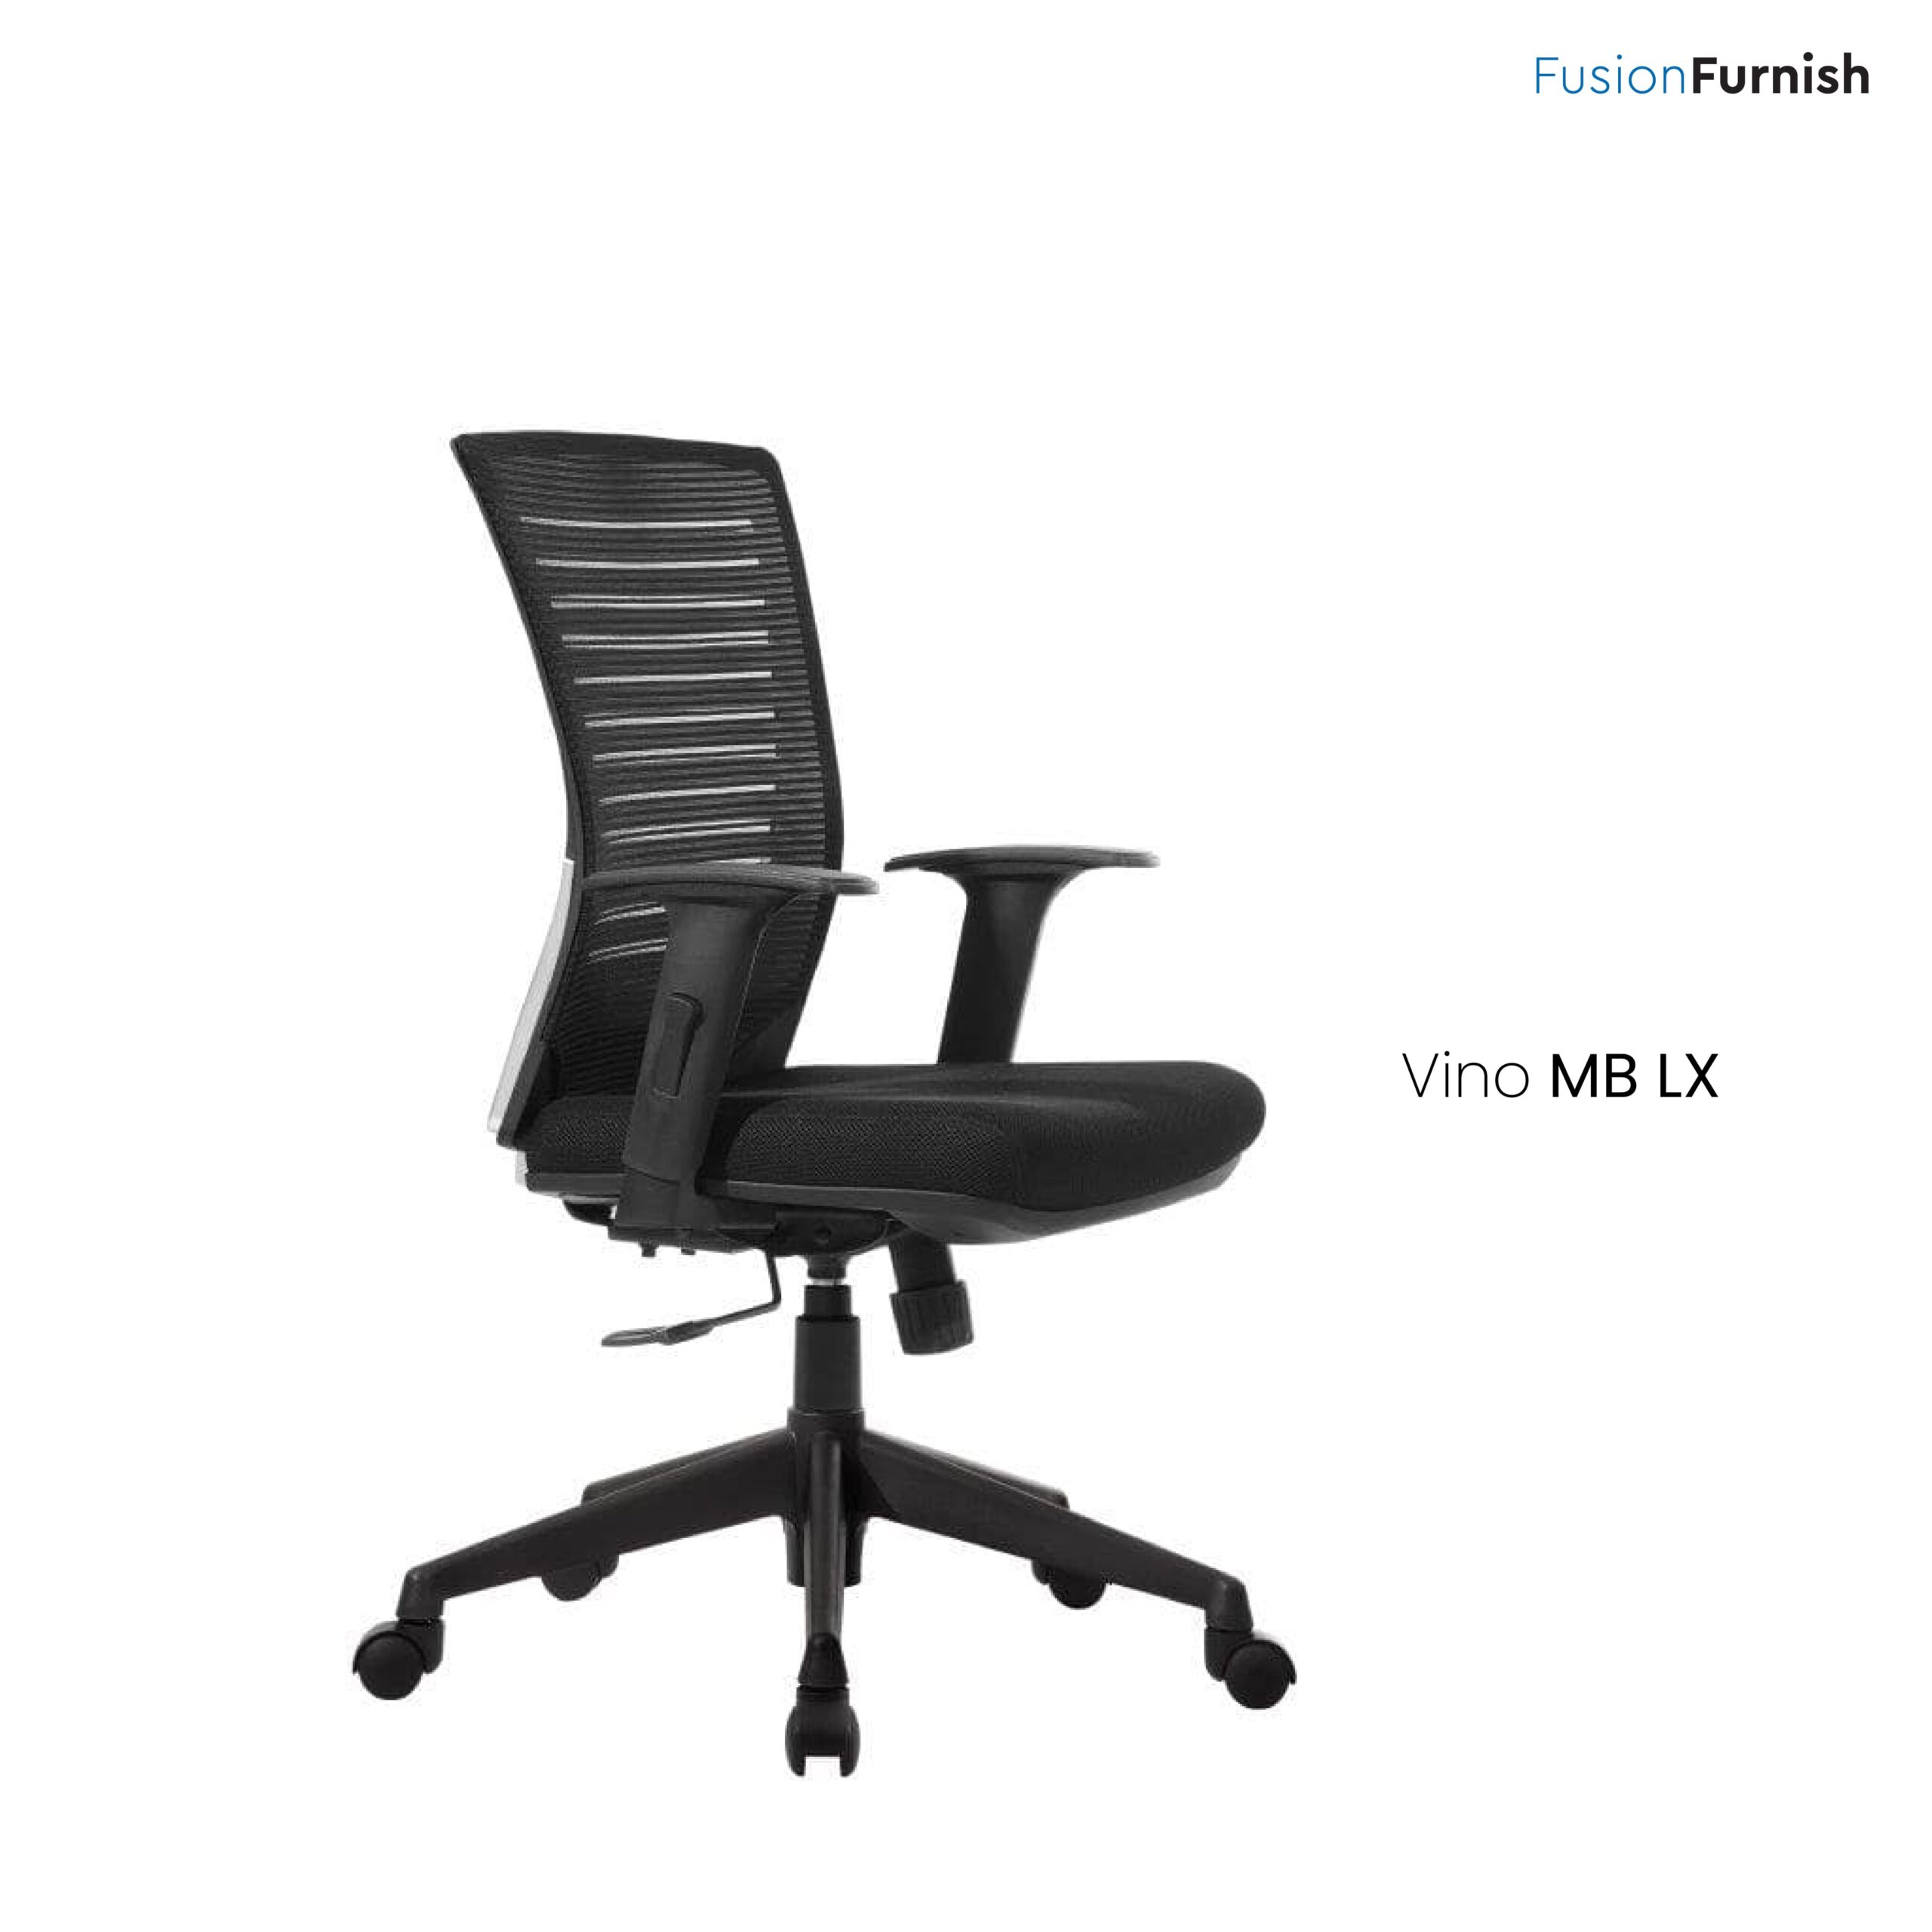 VINO MB LXMake your workspace more productive and comfortable with office chairs from the Vino series. Glam and stylish, these ergonomic chairs will be perfect for your workstation.